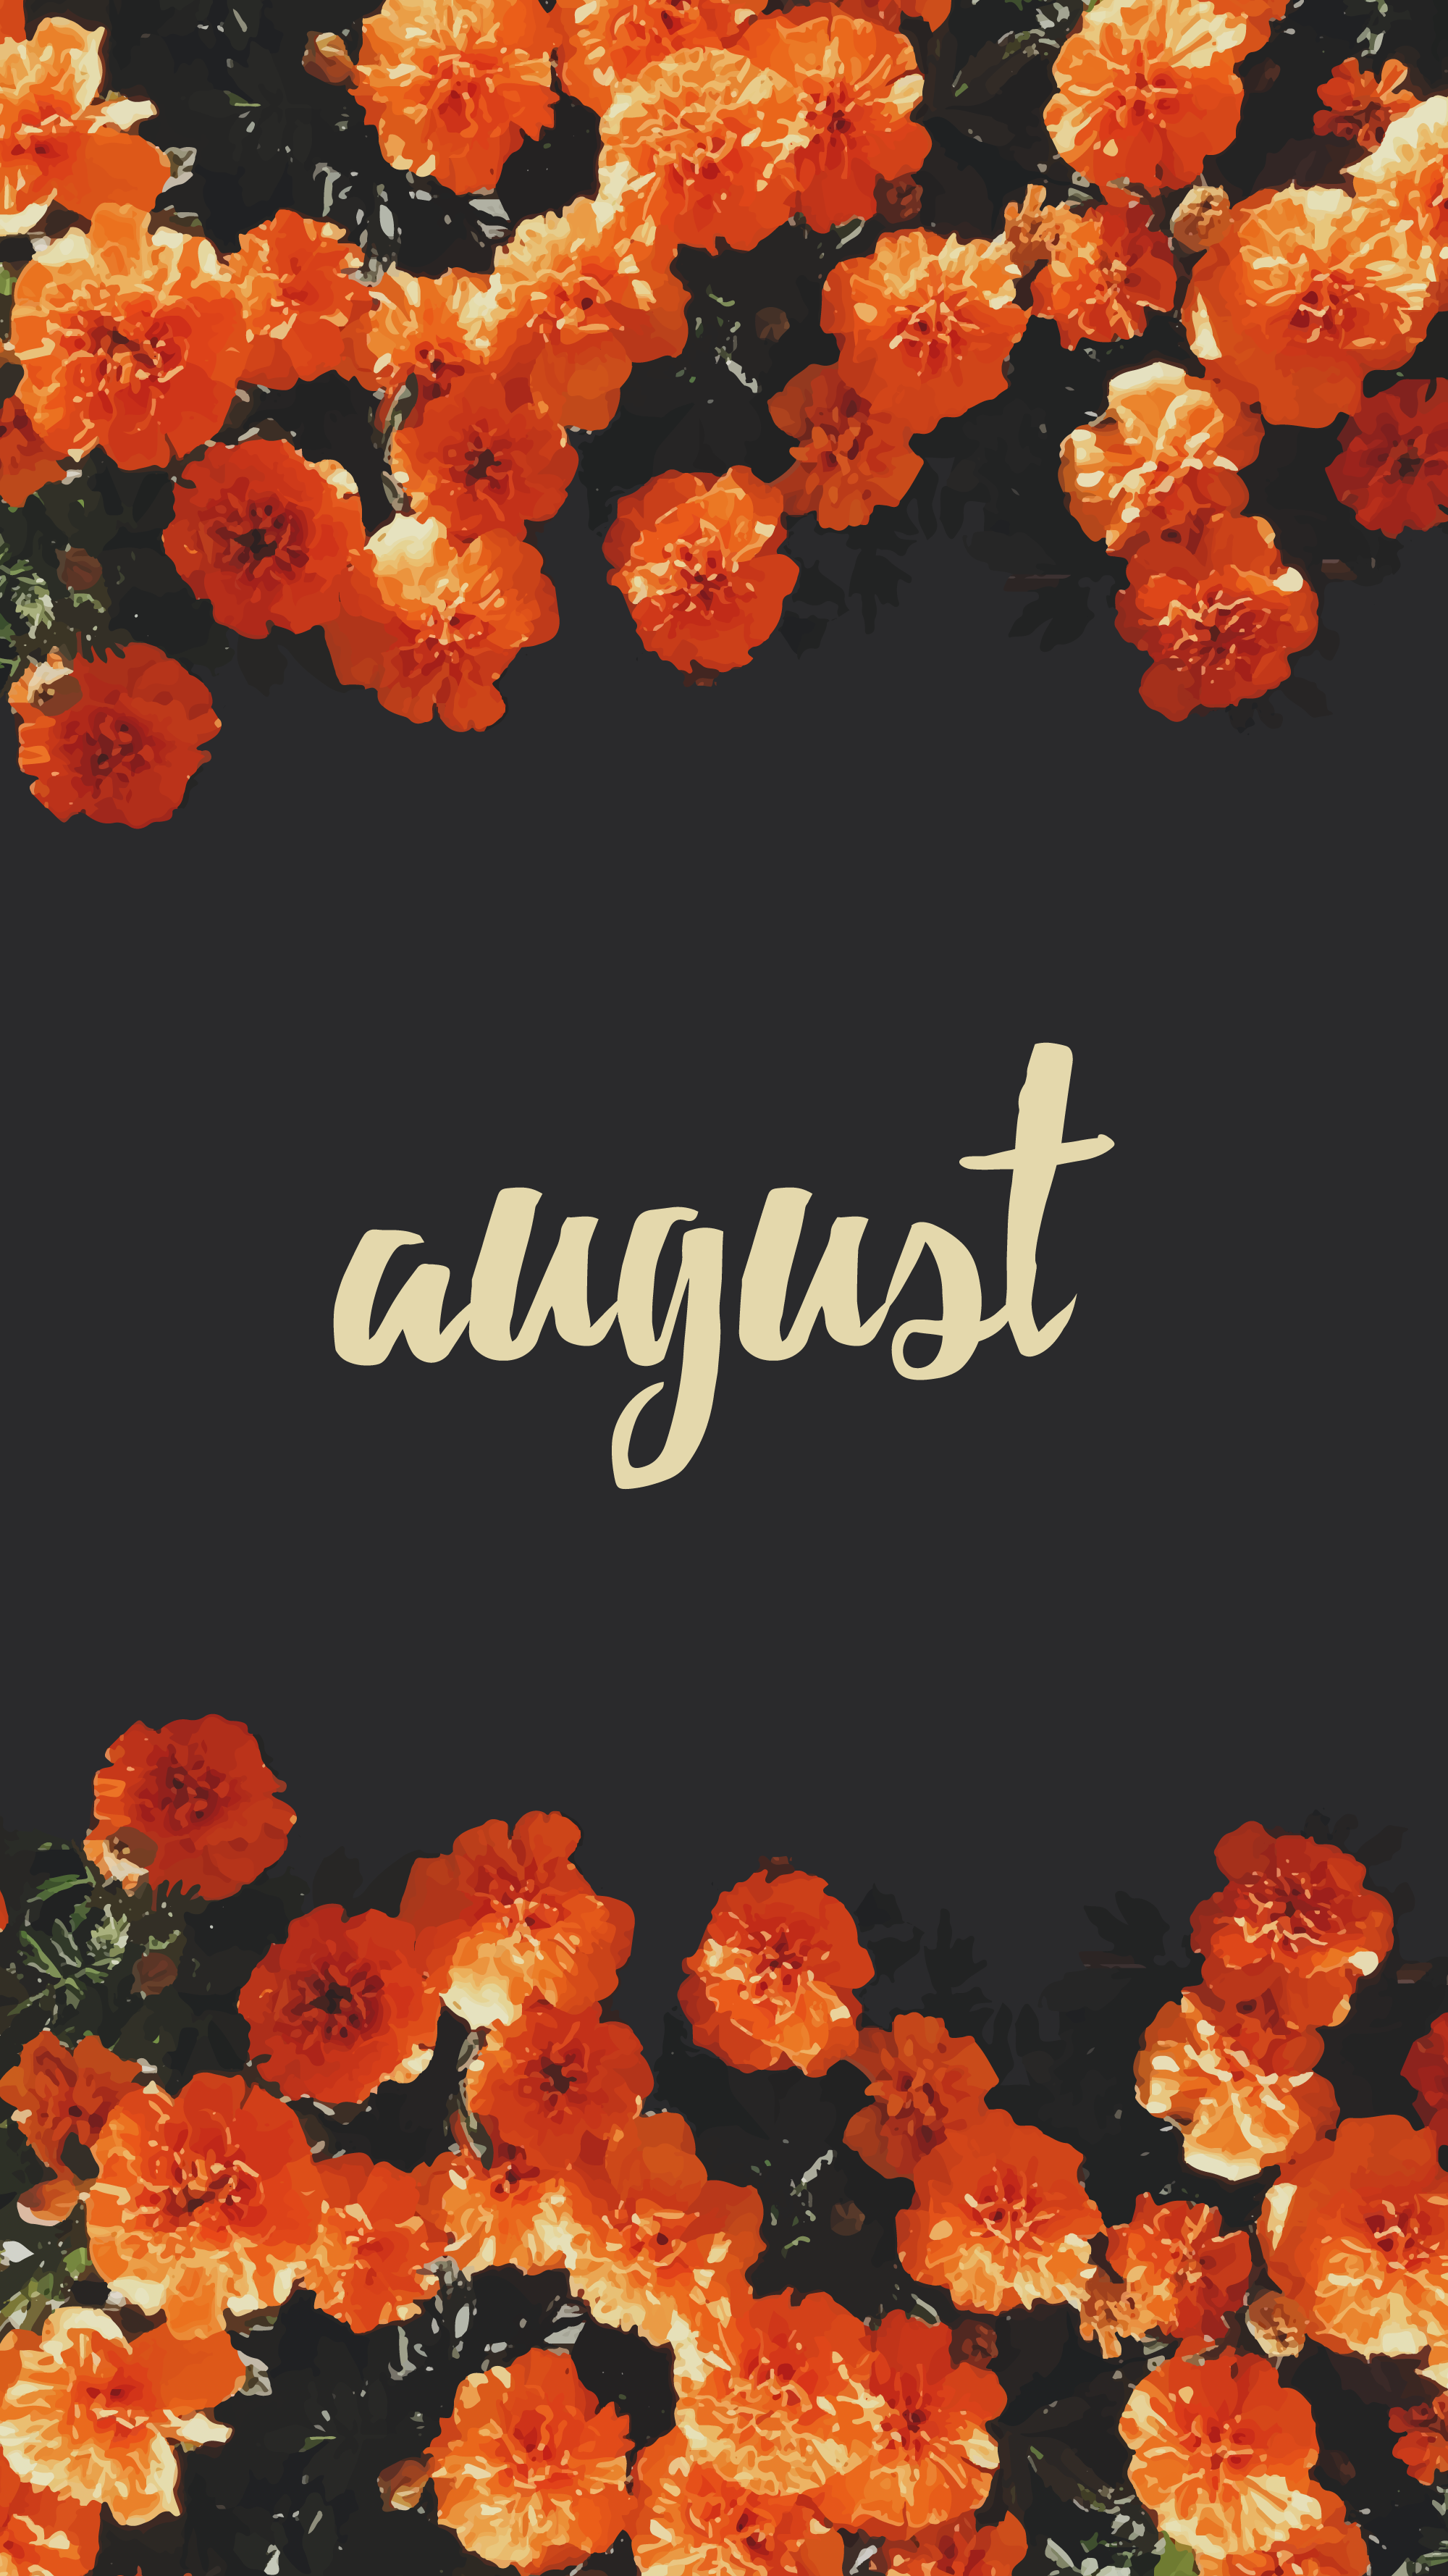 August Iphone Wallpapers